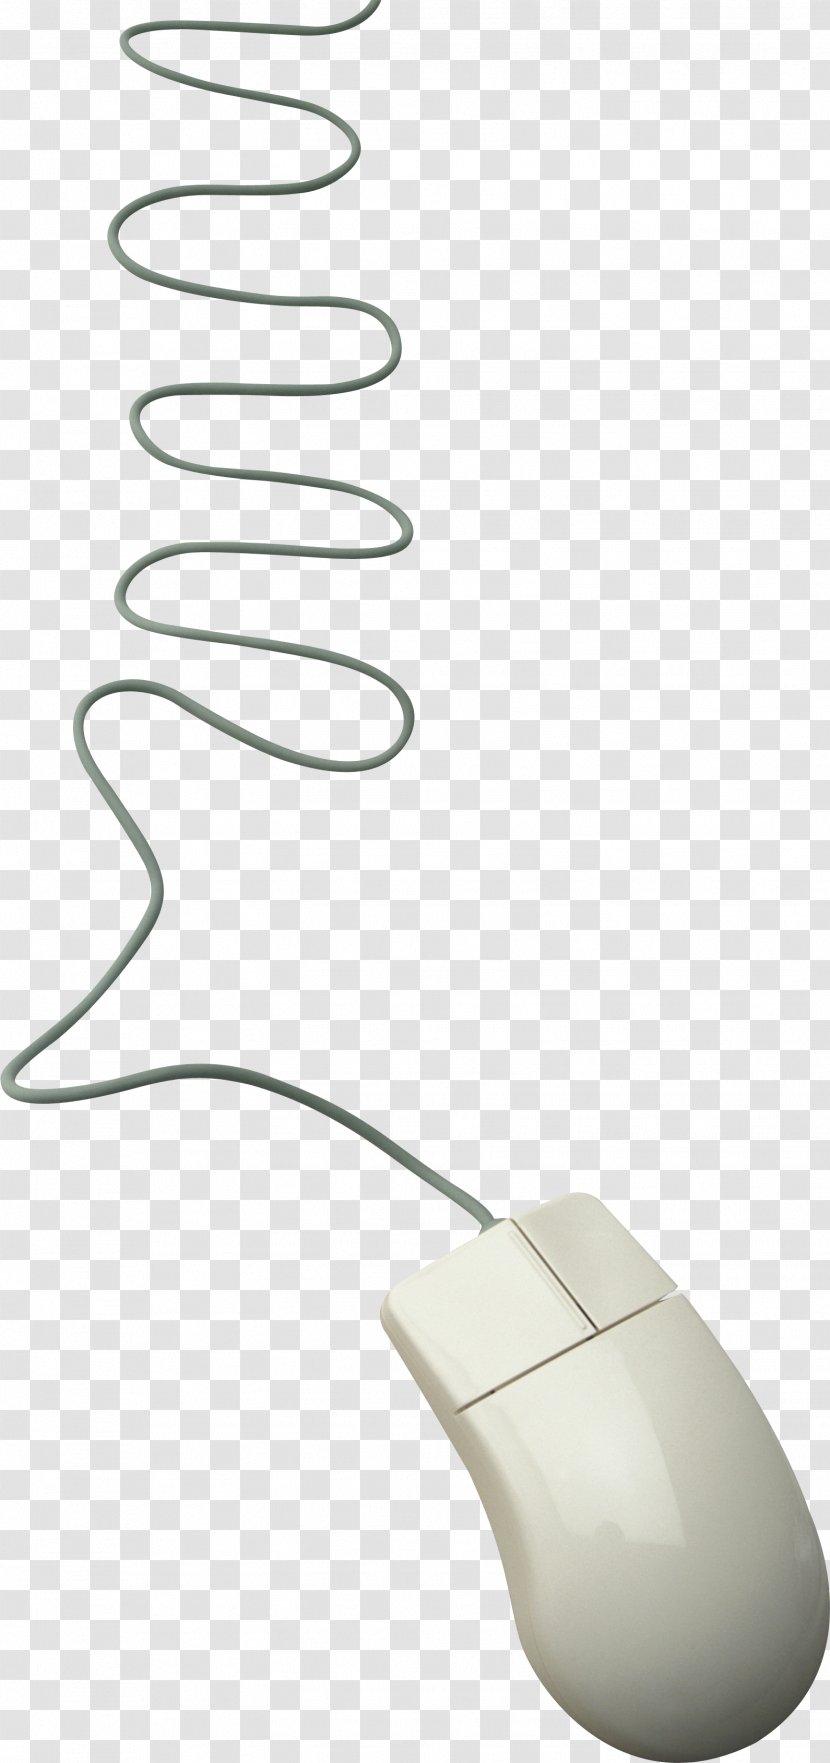 Computer Mouse Optical Pointer Pointing Device - Technology - White Image Transparent PNG